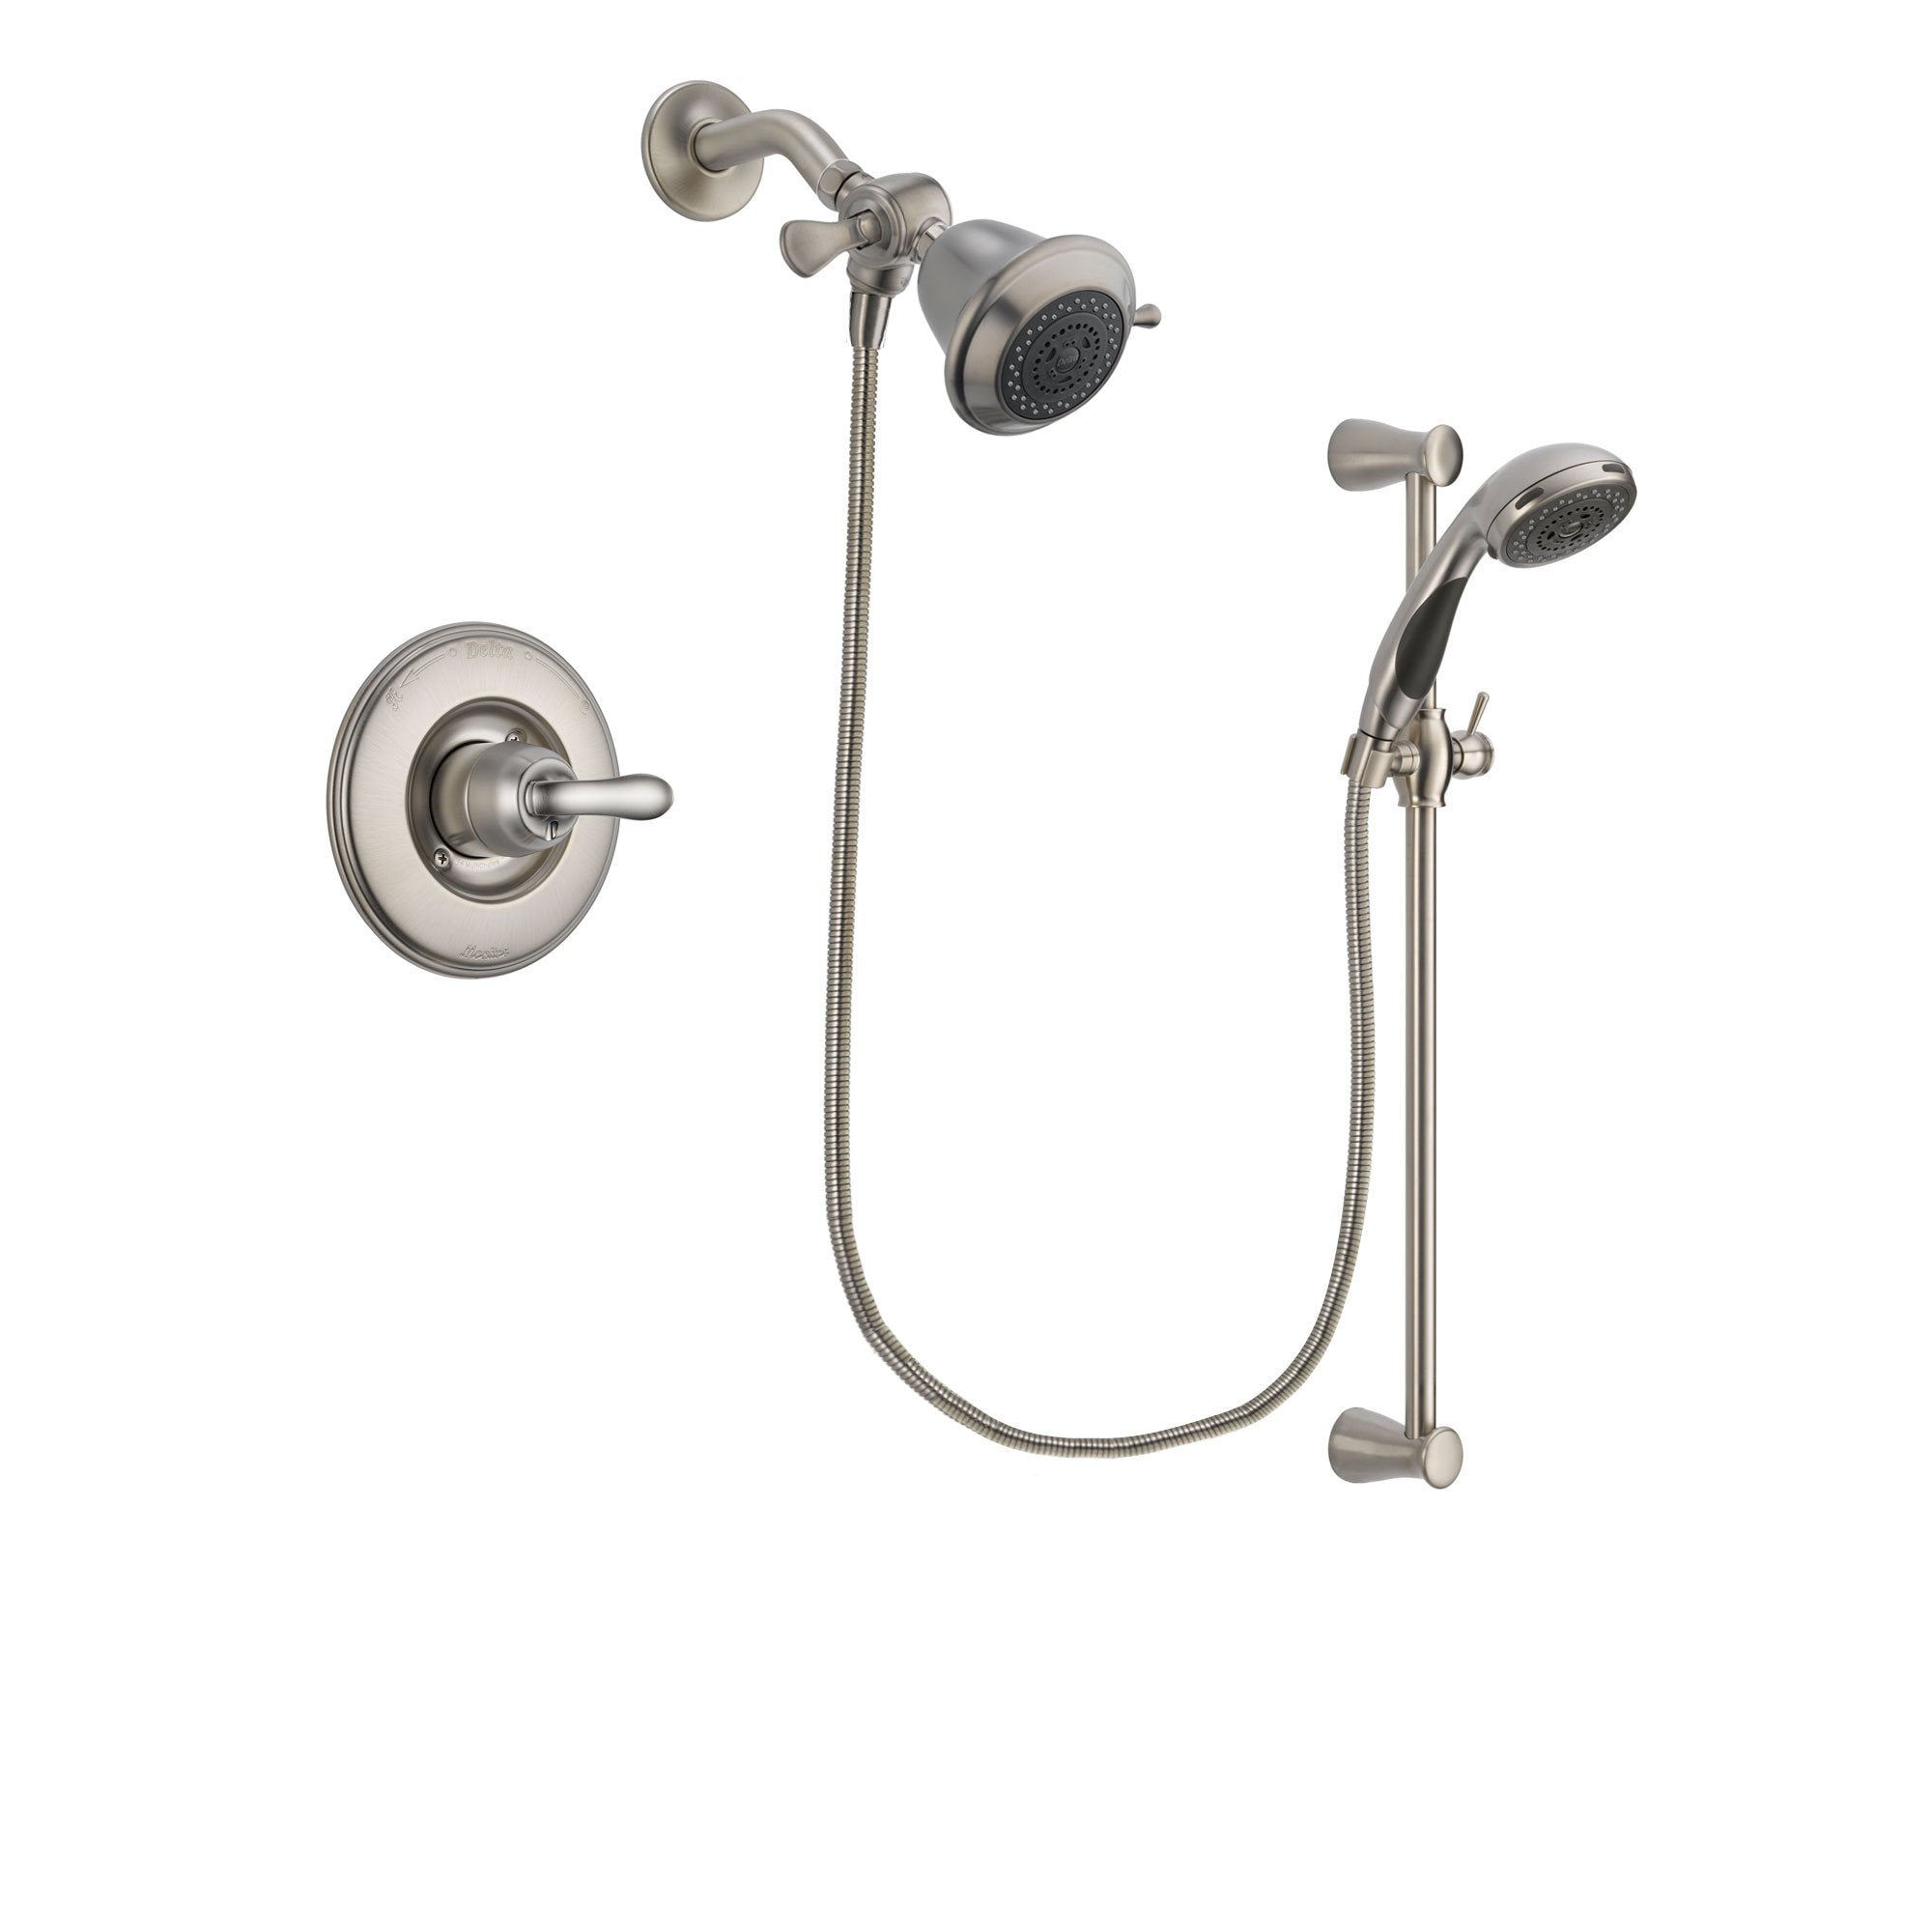 Delta Linden Stainless Steel Finish Shower Faucet System Package with Shower Head and Handheld Shower Spray with Slide Bar Includes Rough-in Valve DSP1532V